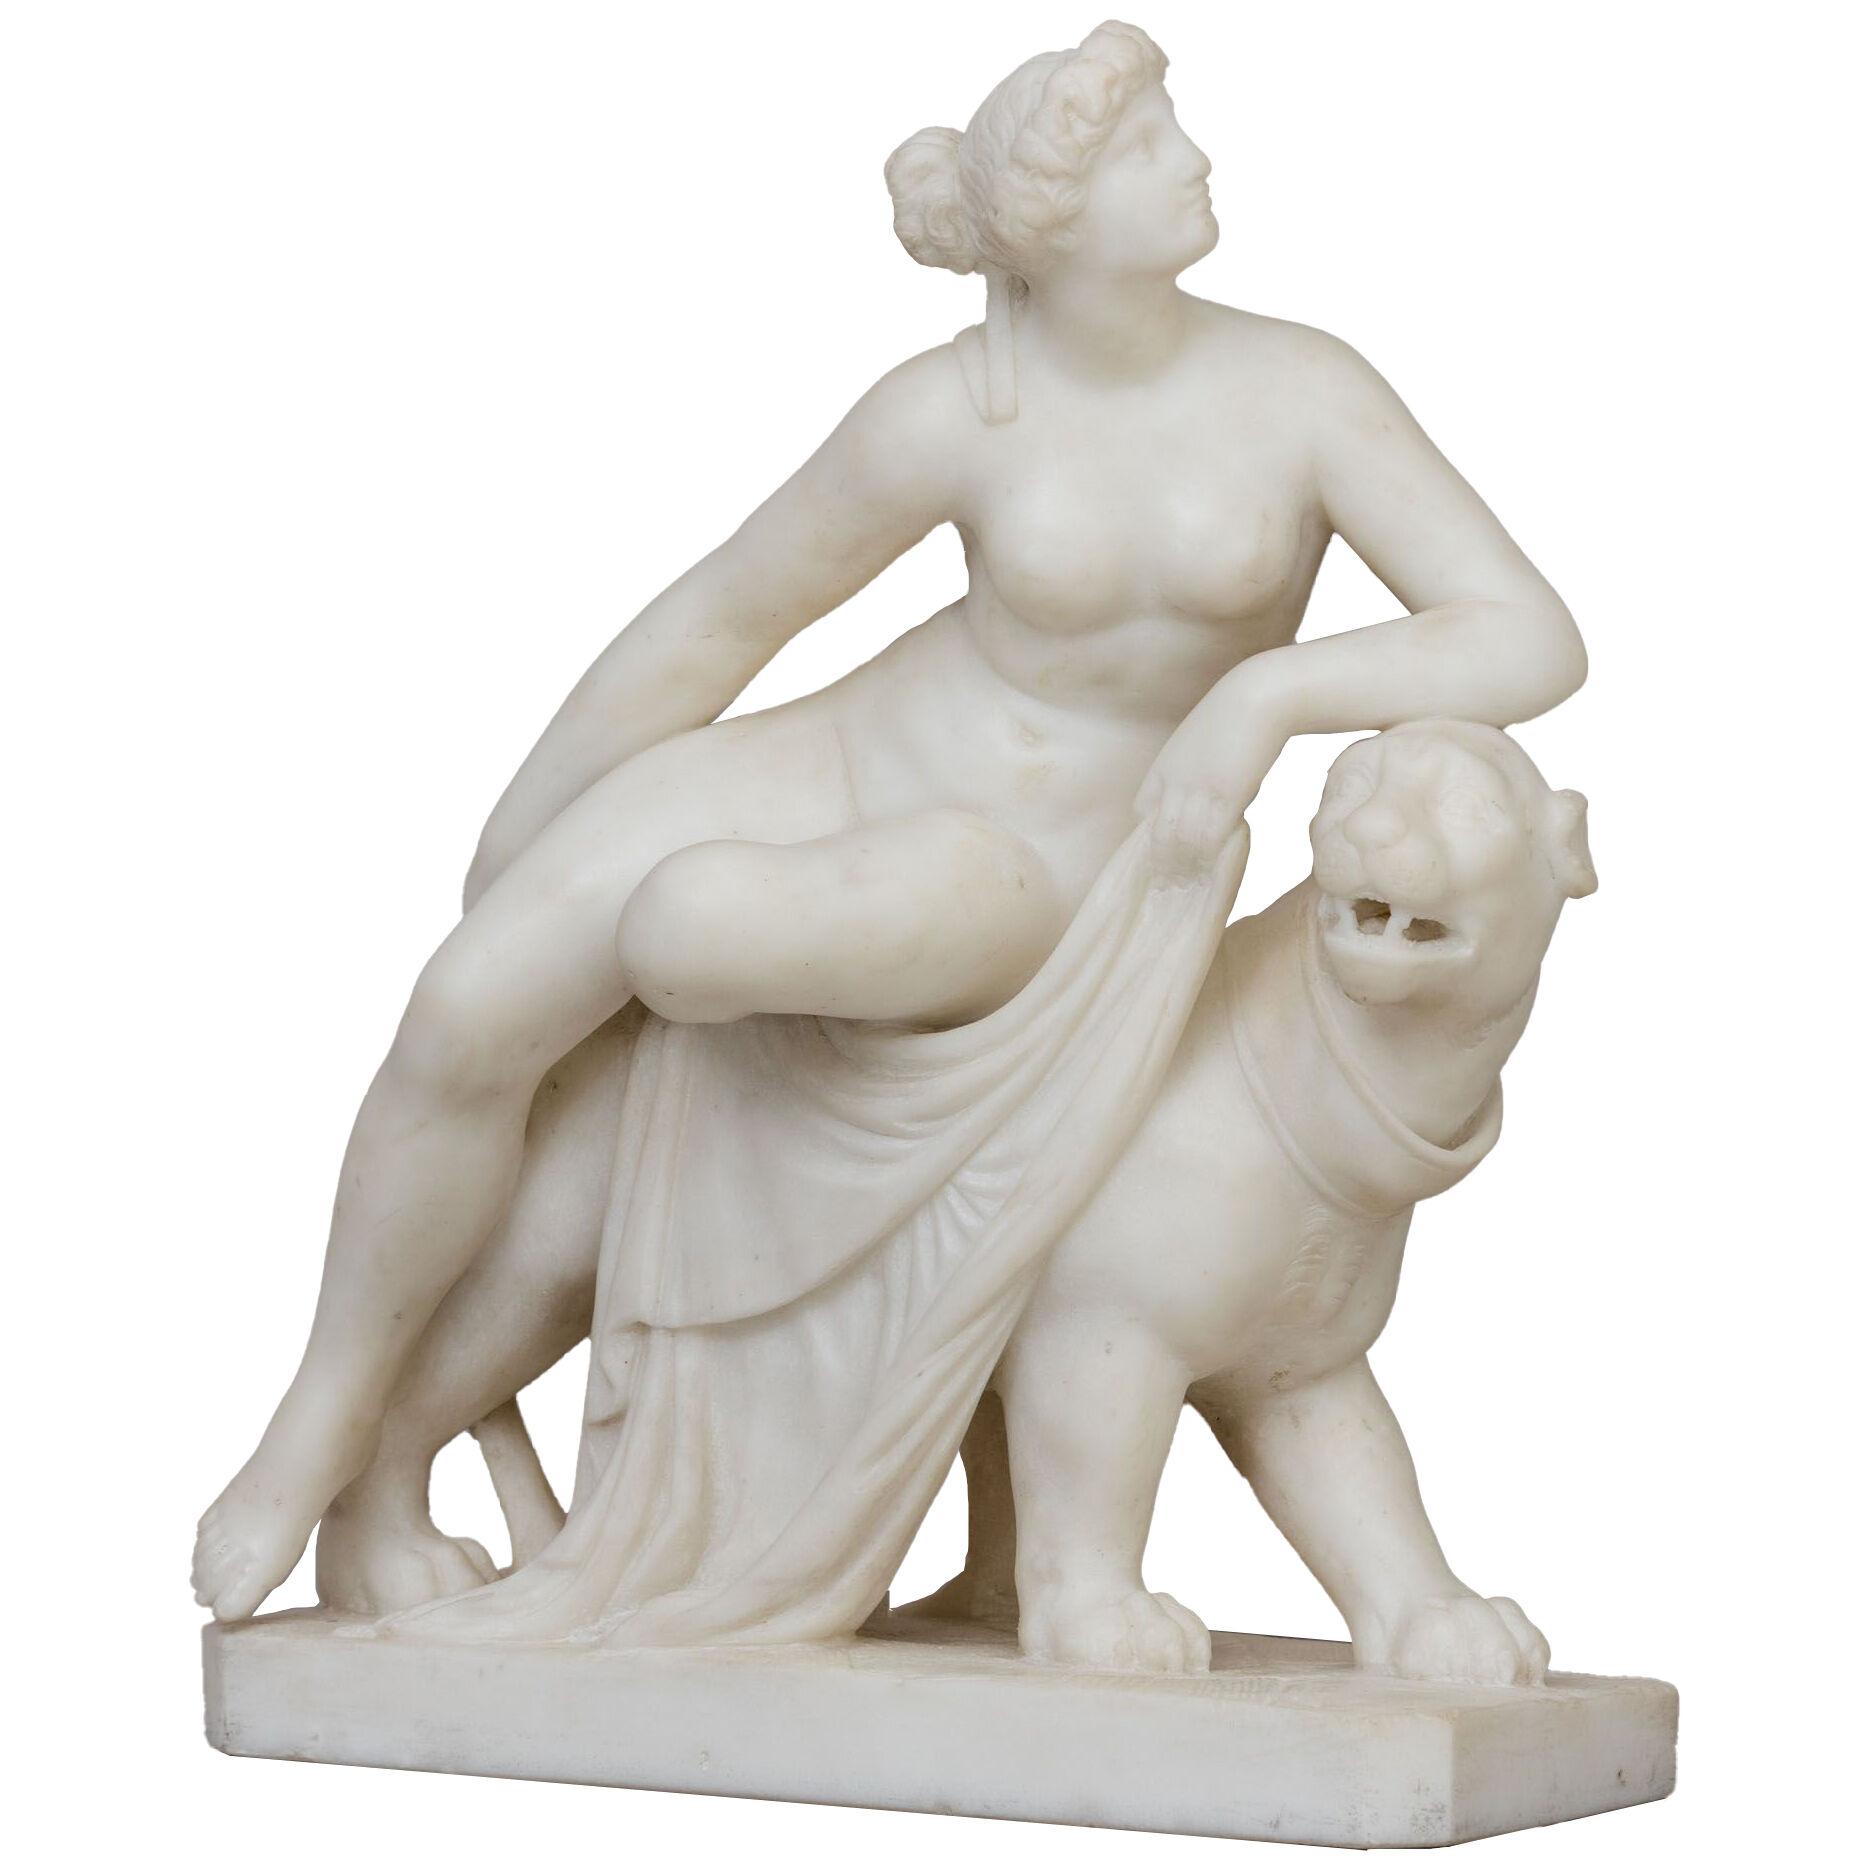 Ariadne on the Panther, after Dannecker, 2nd Half 19th Century